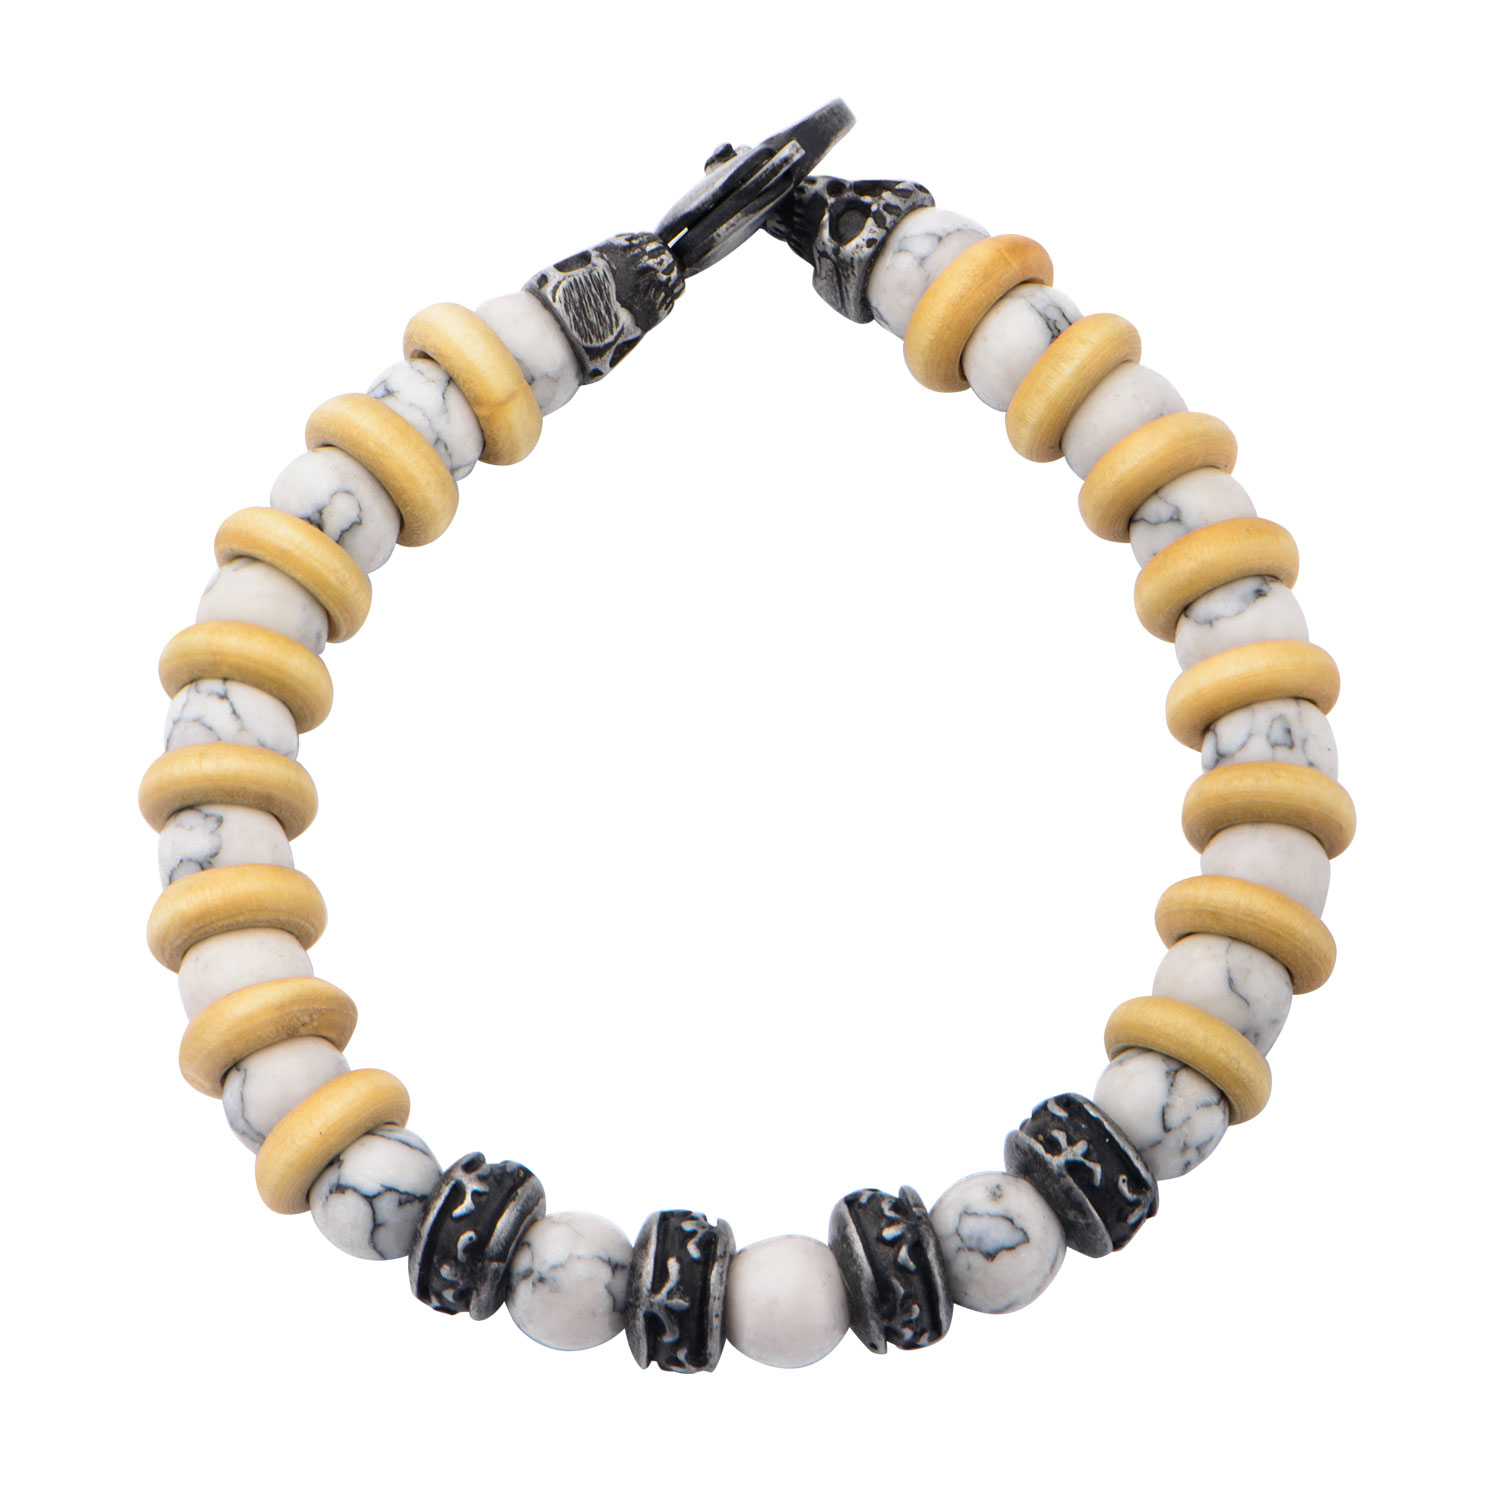 8mm White Howlite Beads with Taupe Wood Separators Bracelet Image 4 Spath Jewelers Bartow, FL